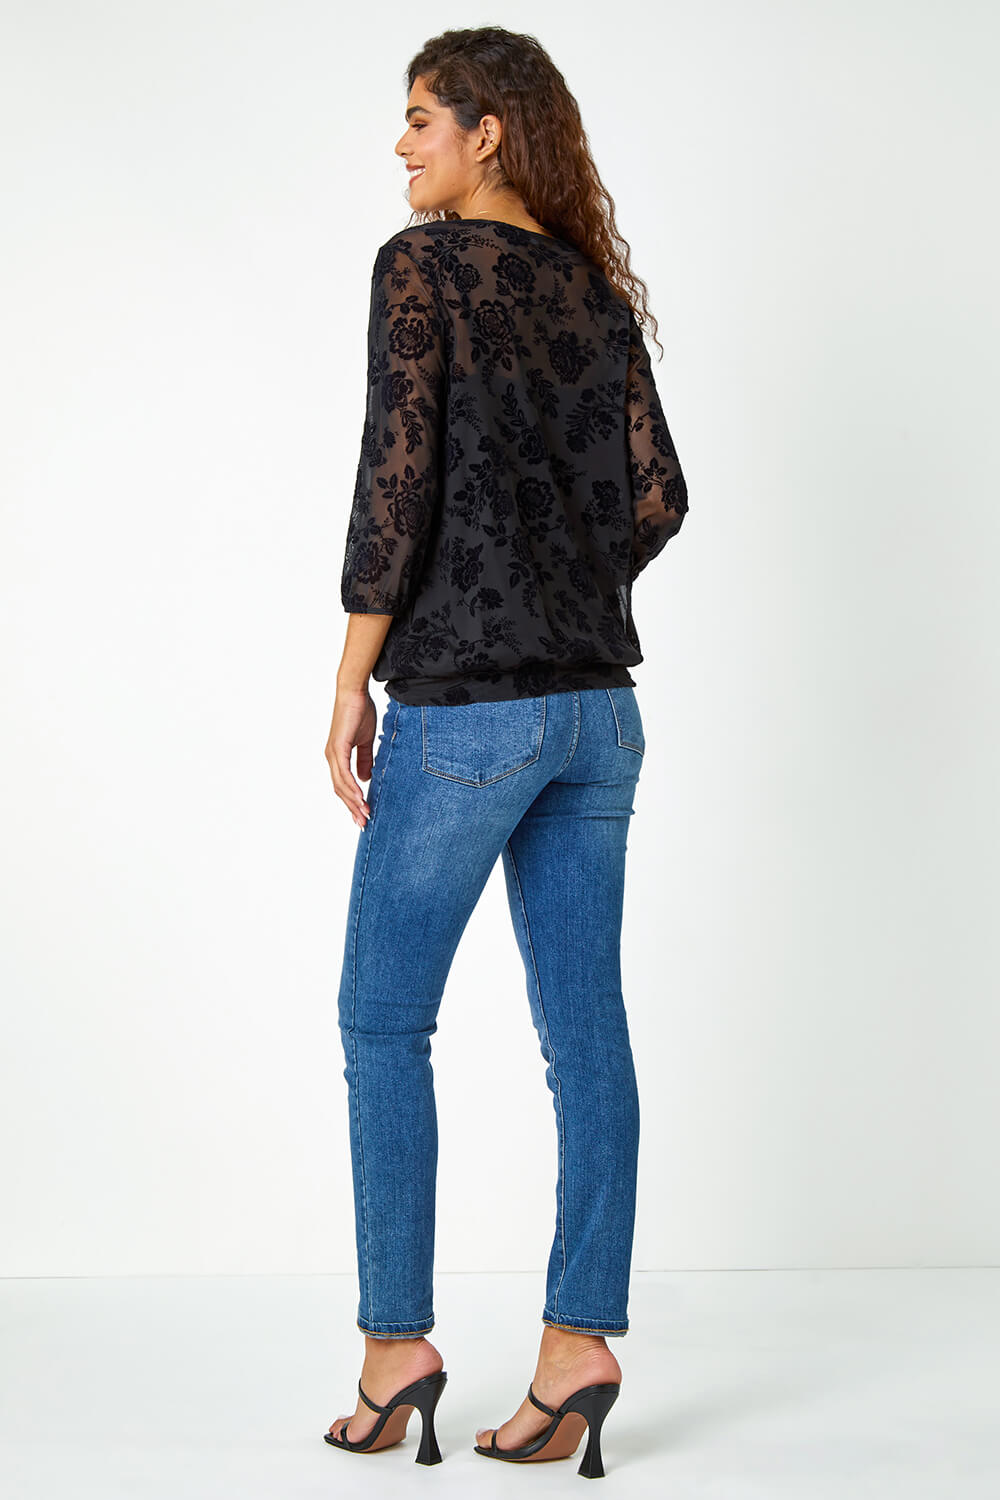 Black Textured Floral Print Mesh Stretch Top, Image 3 of 5